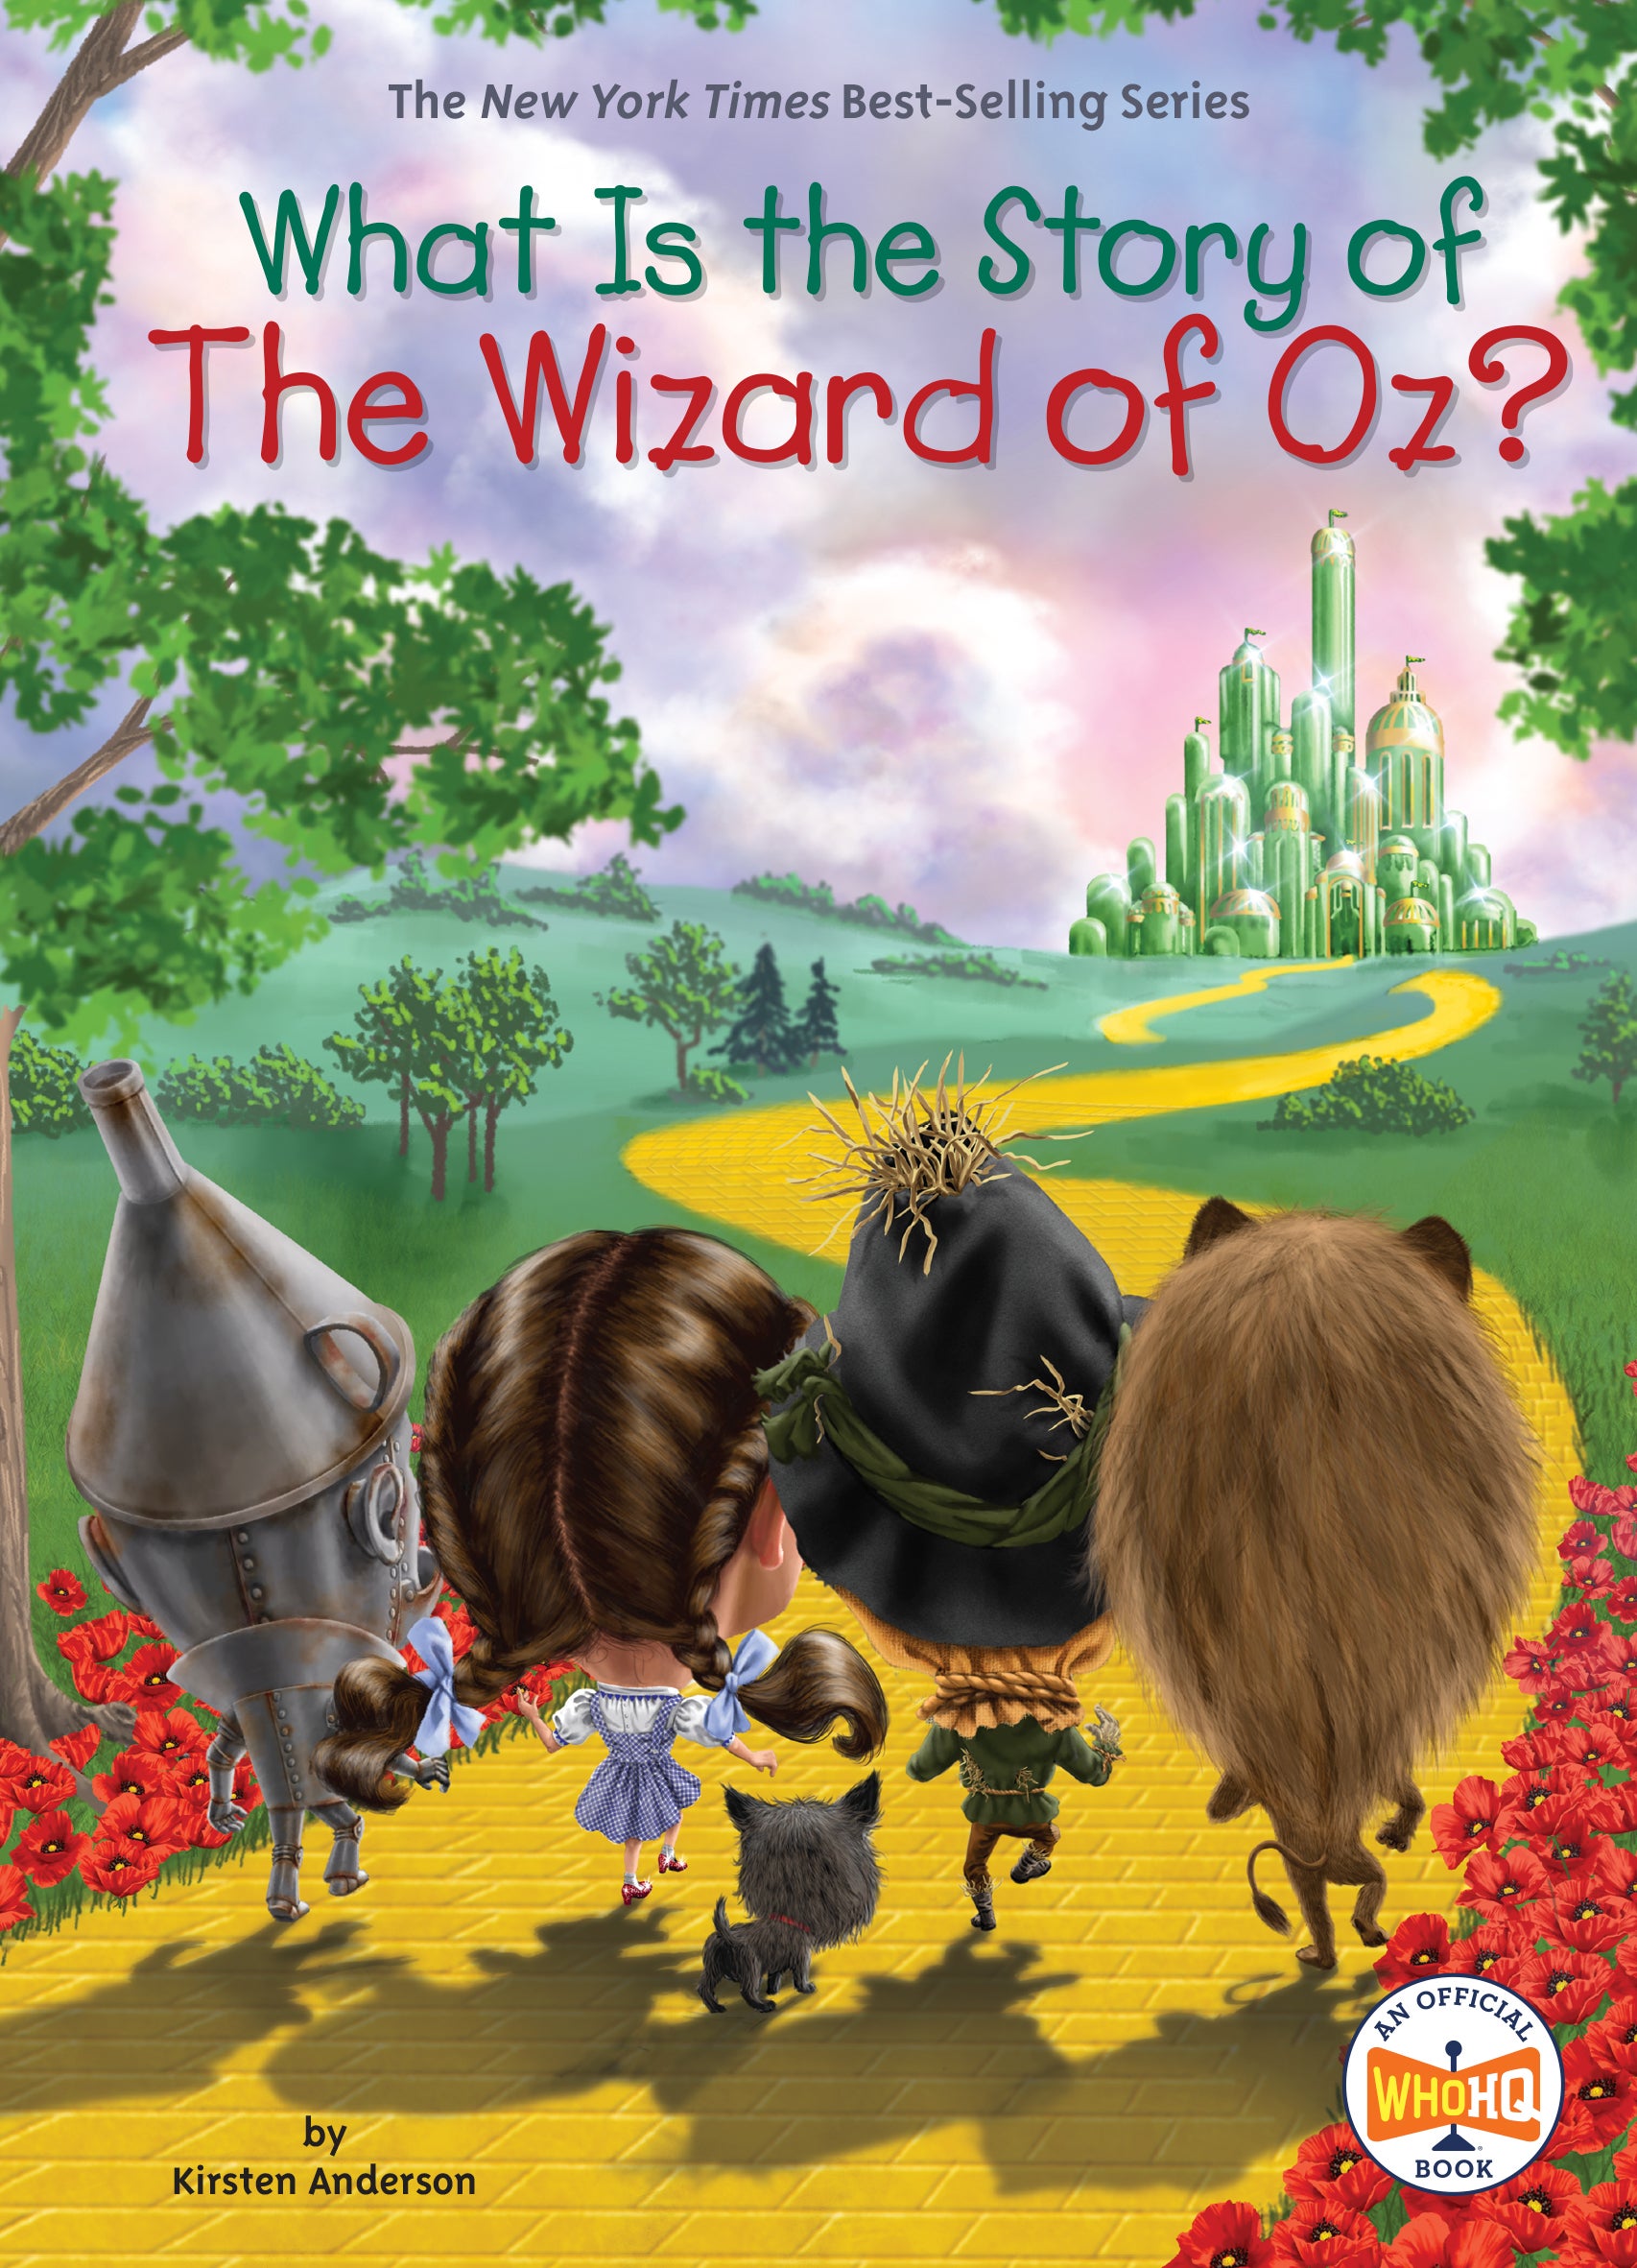 The Wizard of Oz Is Officially the Most Influential Film of All